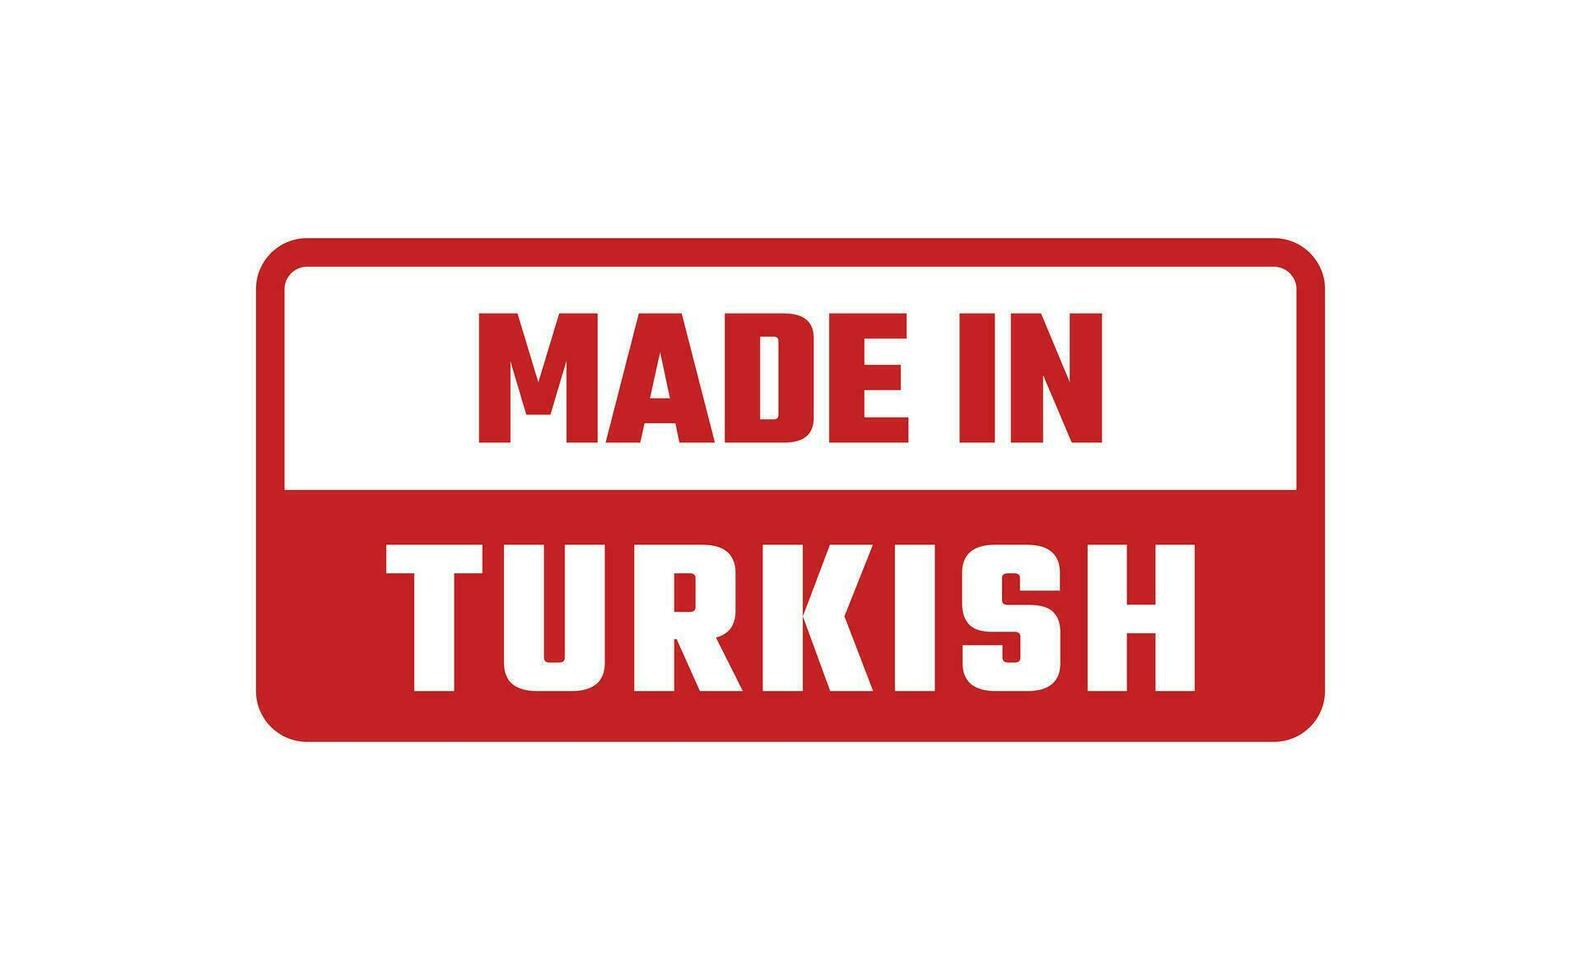 Made In Turkish Rubber Stamp vector